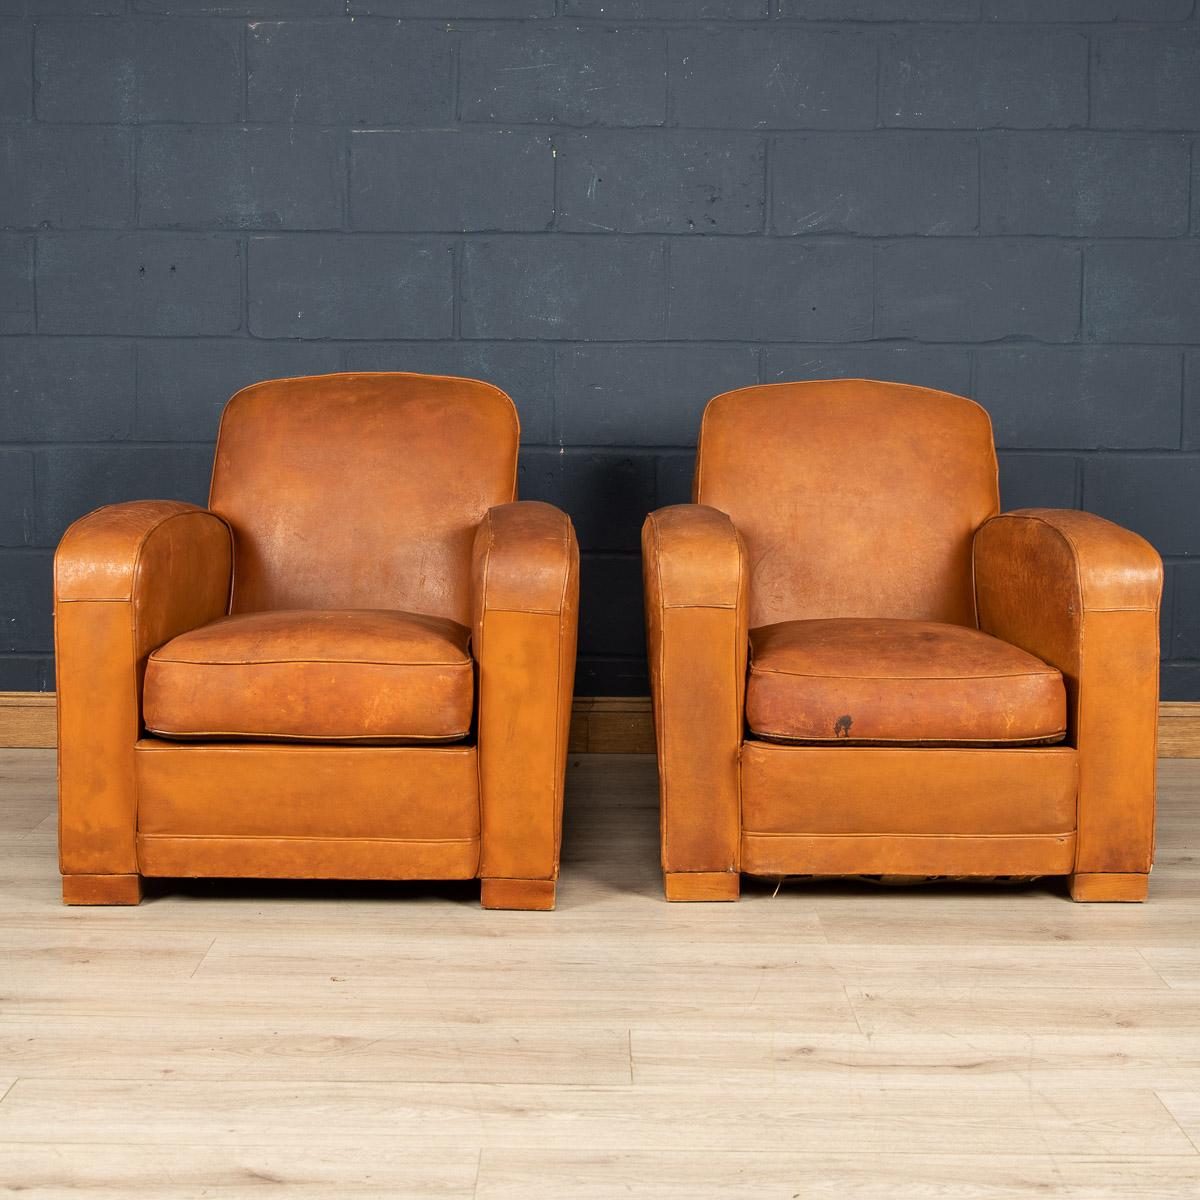 20th Century Pair of Art Deco Style French Leather Club Chairs In Good Condition For Sale In Royal Tunbridge Wells, Kent